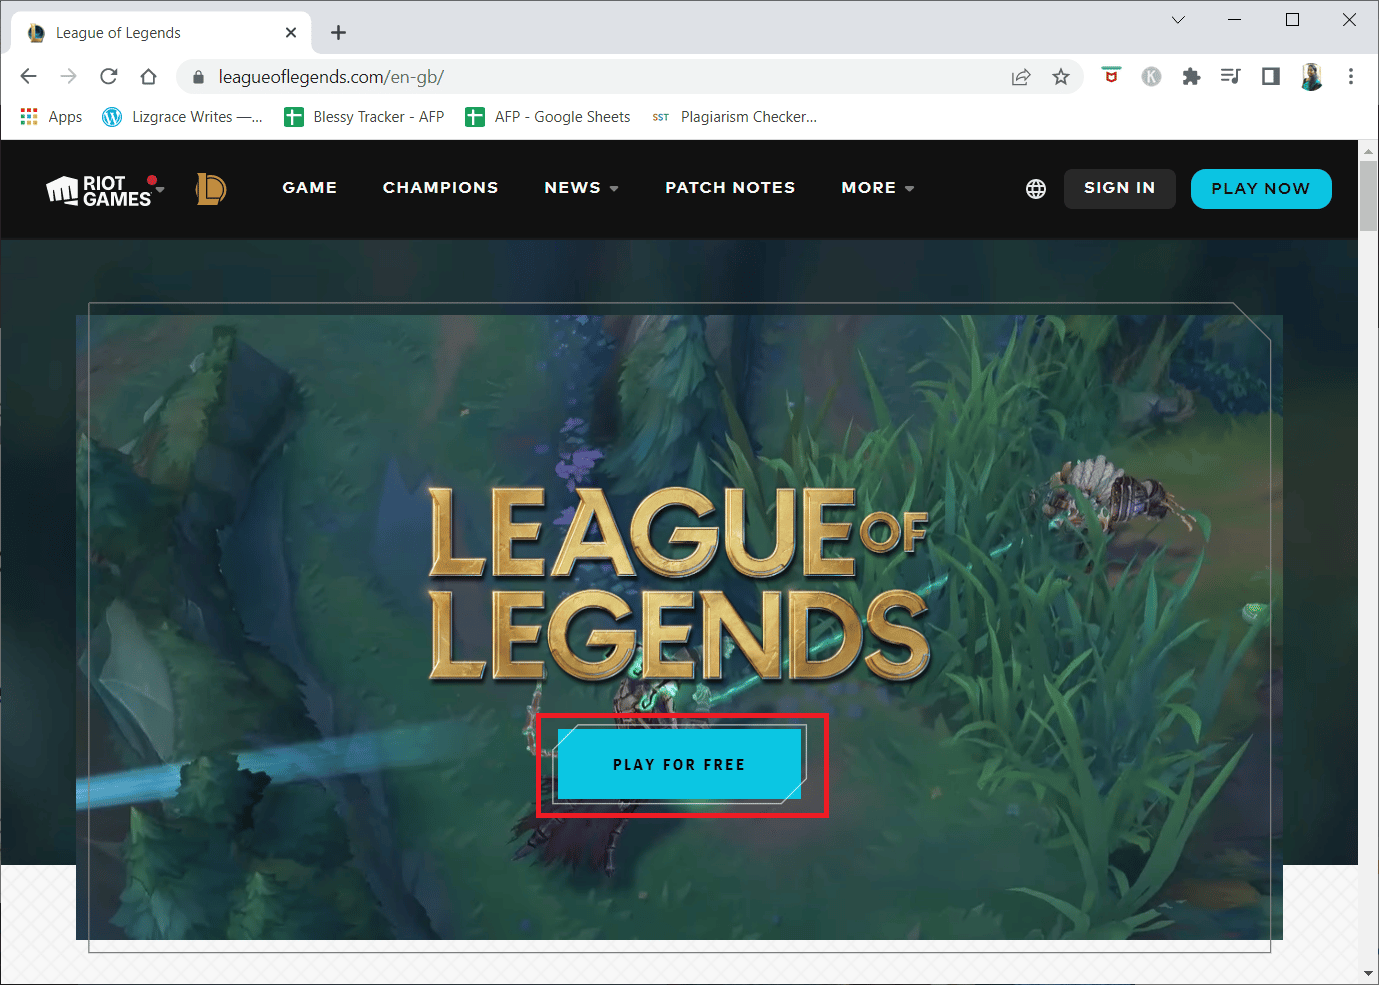 go to the League of Legends official website download page and click on the PLAY FOR FREE option